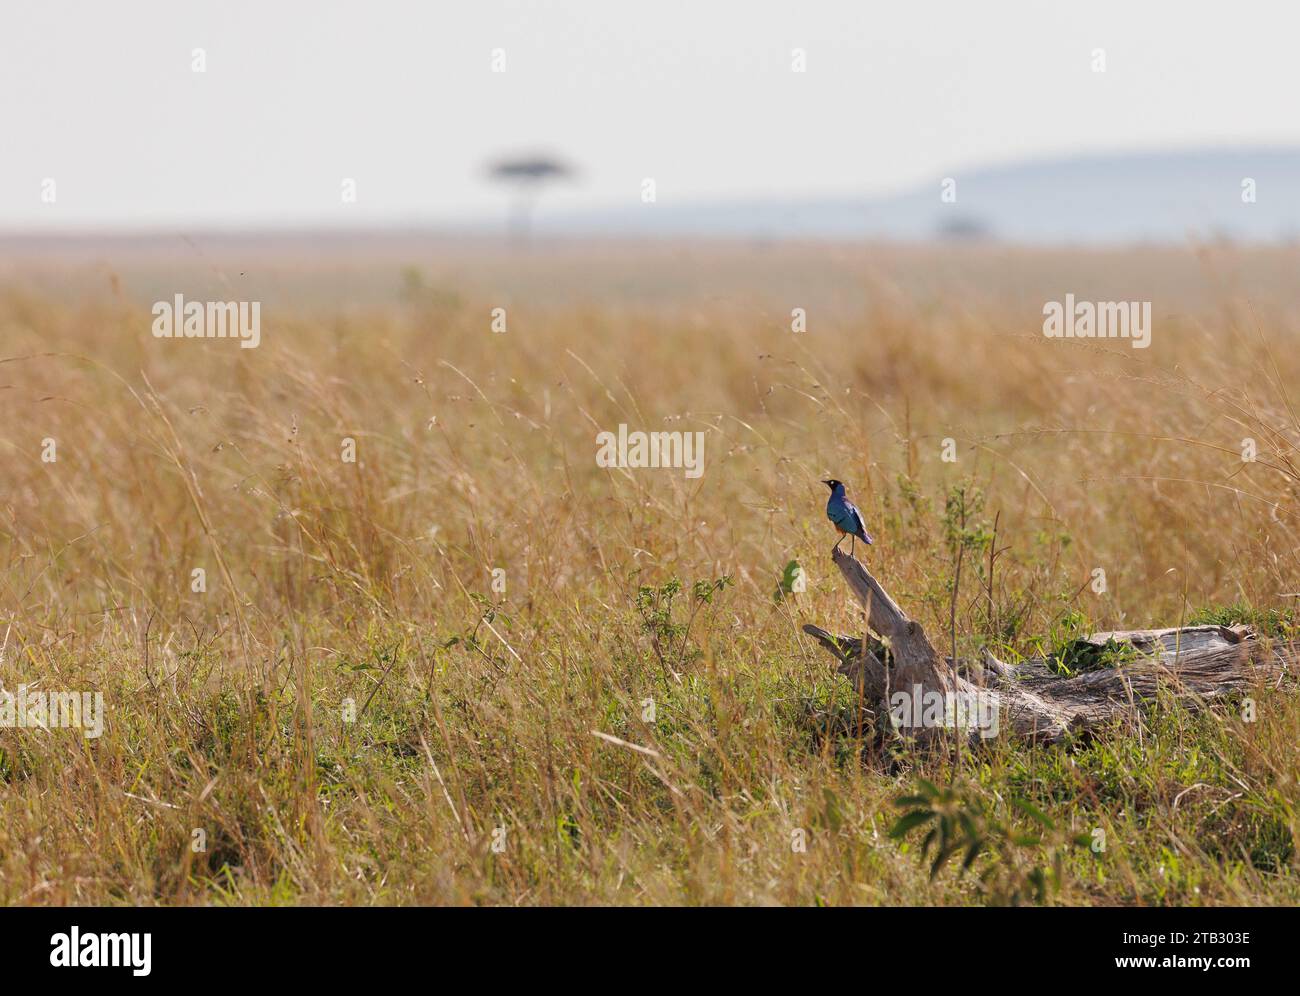 A photo of a superb starling perched on a fallen tree branch in Masai Mara Kenya overlooking the open savannah Stock Photo